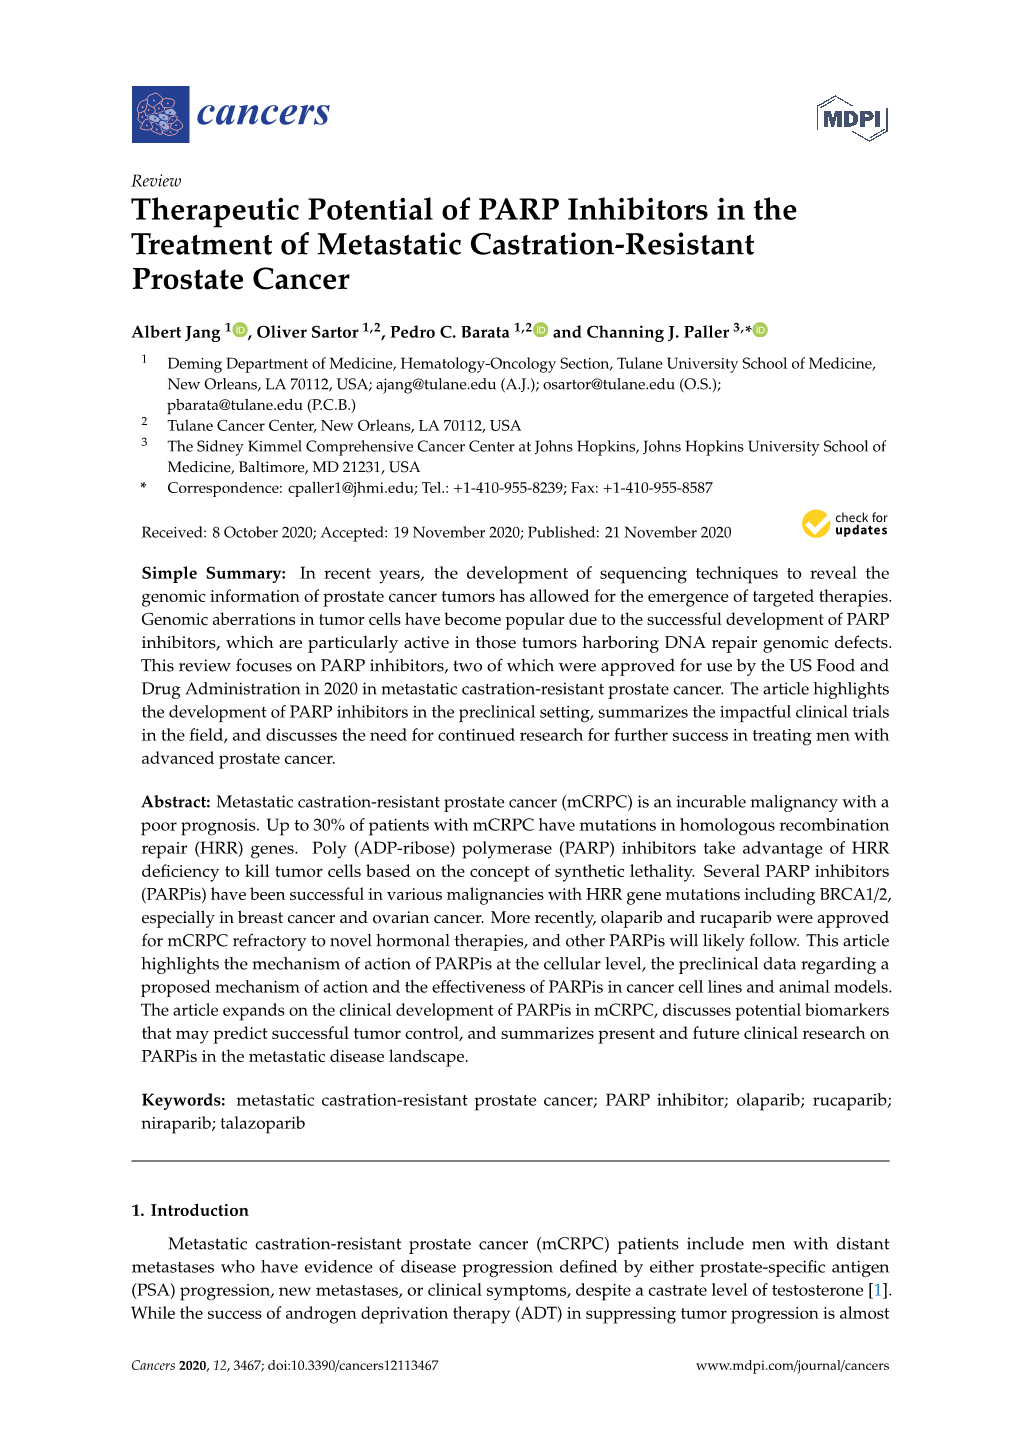 Therapeutic Potential of PARP Inhibitors in the Treatment of Metastatic Castration-Resistant Prostate Cancer